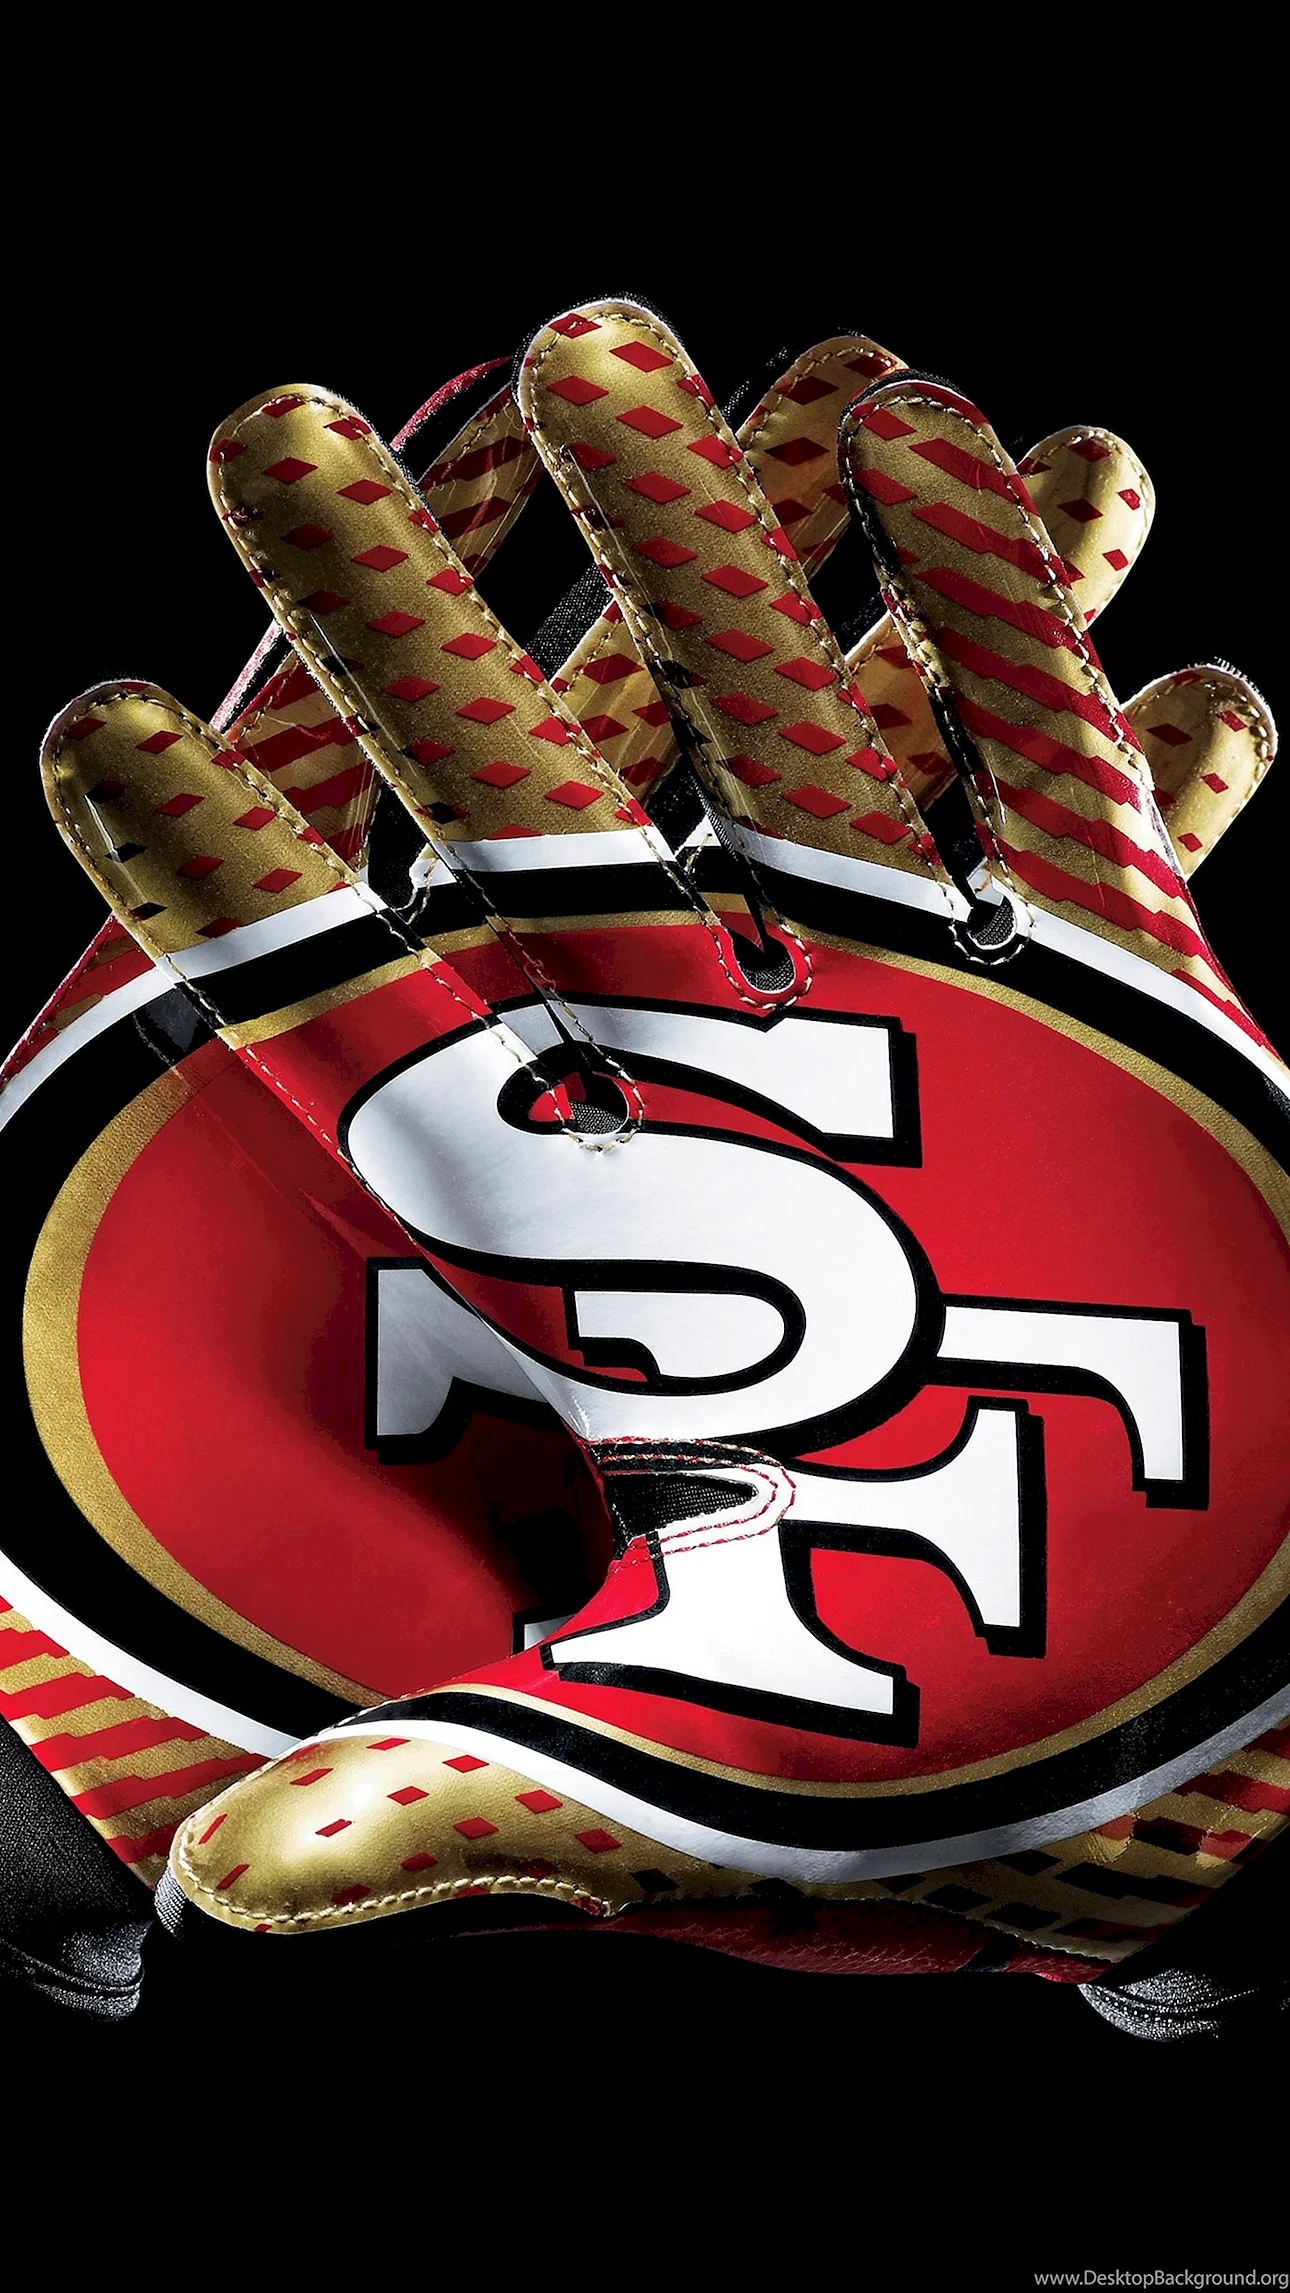 San Francisco 49ers Gloves Wallpaper For iPhone